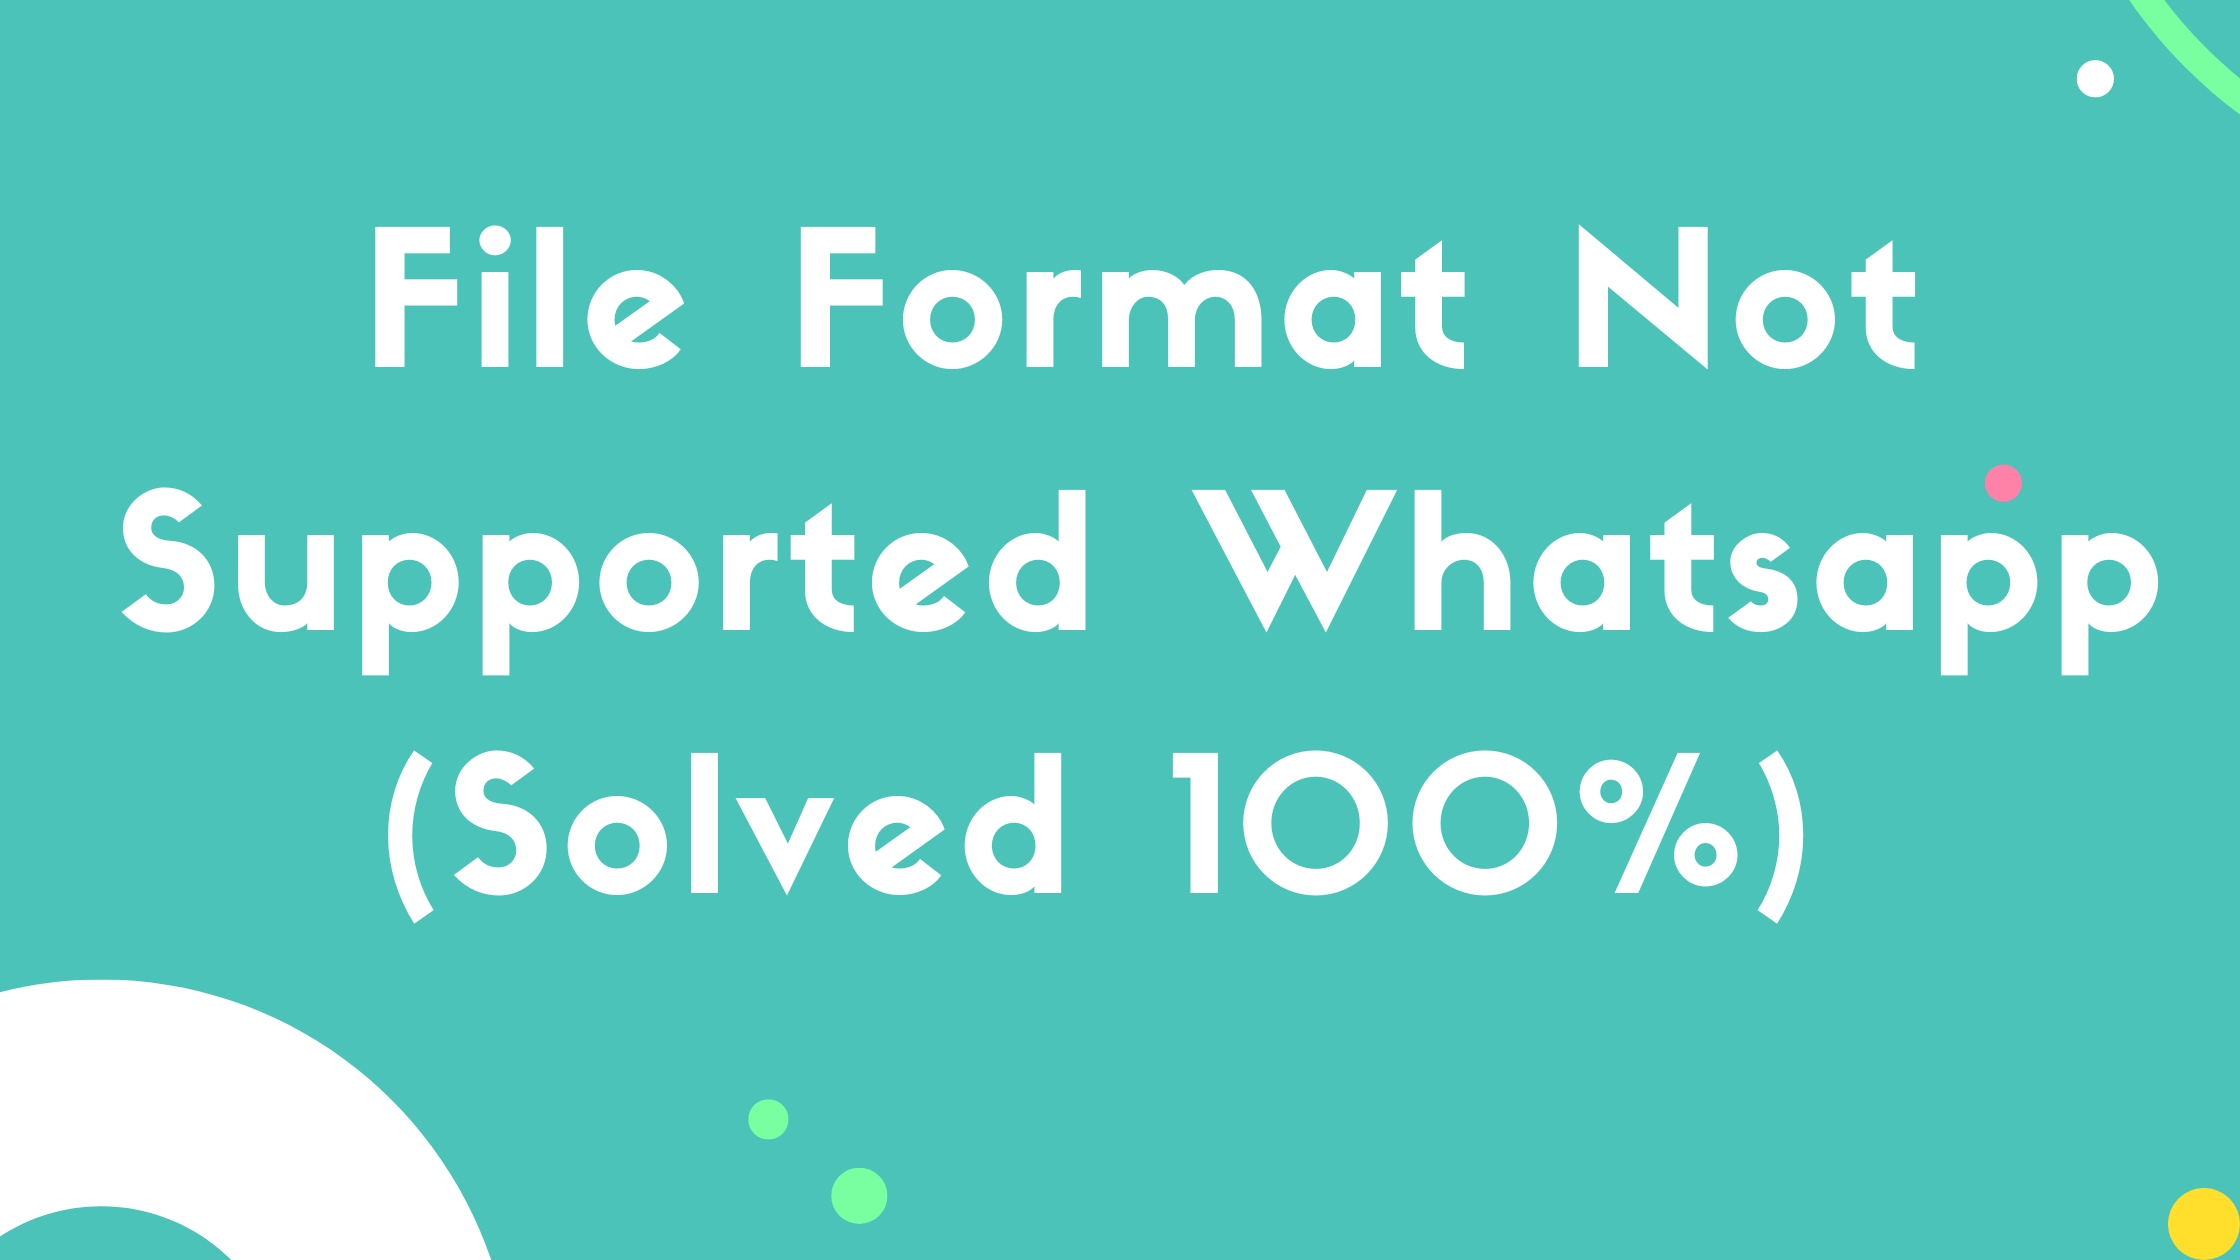 File Format Not Supported in Whatsapp